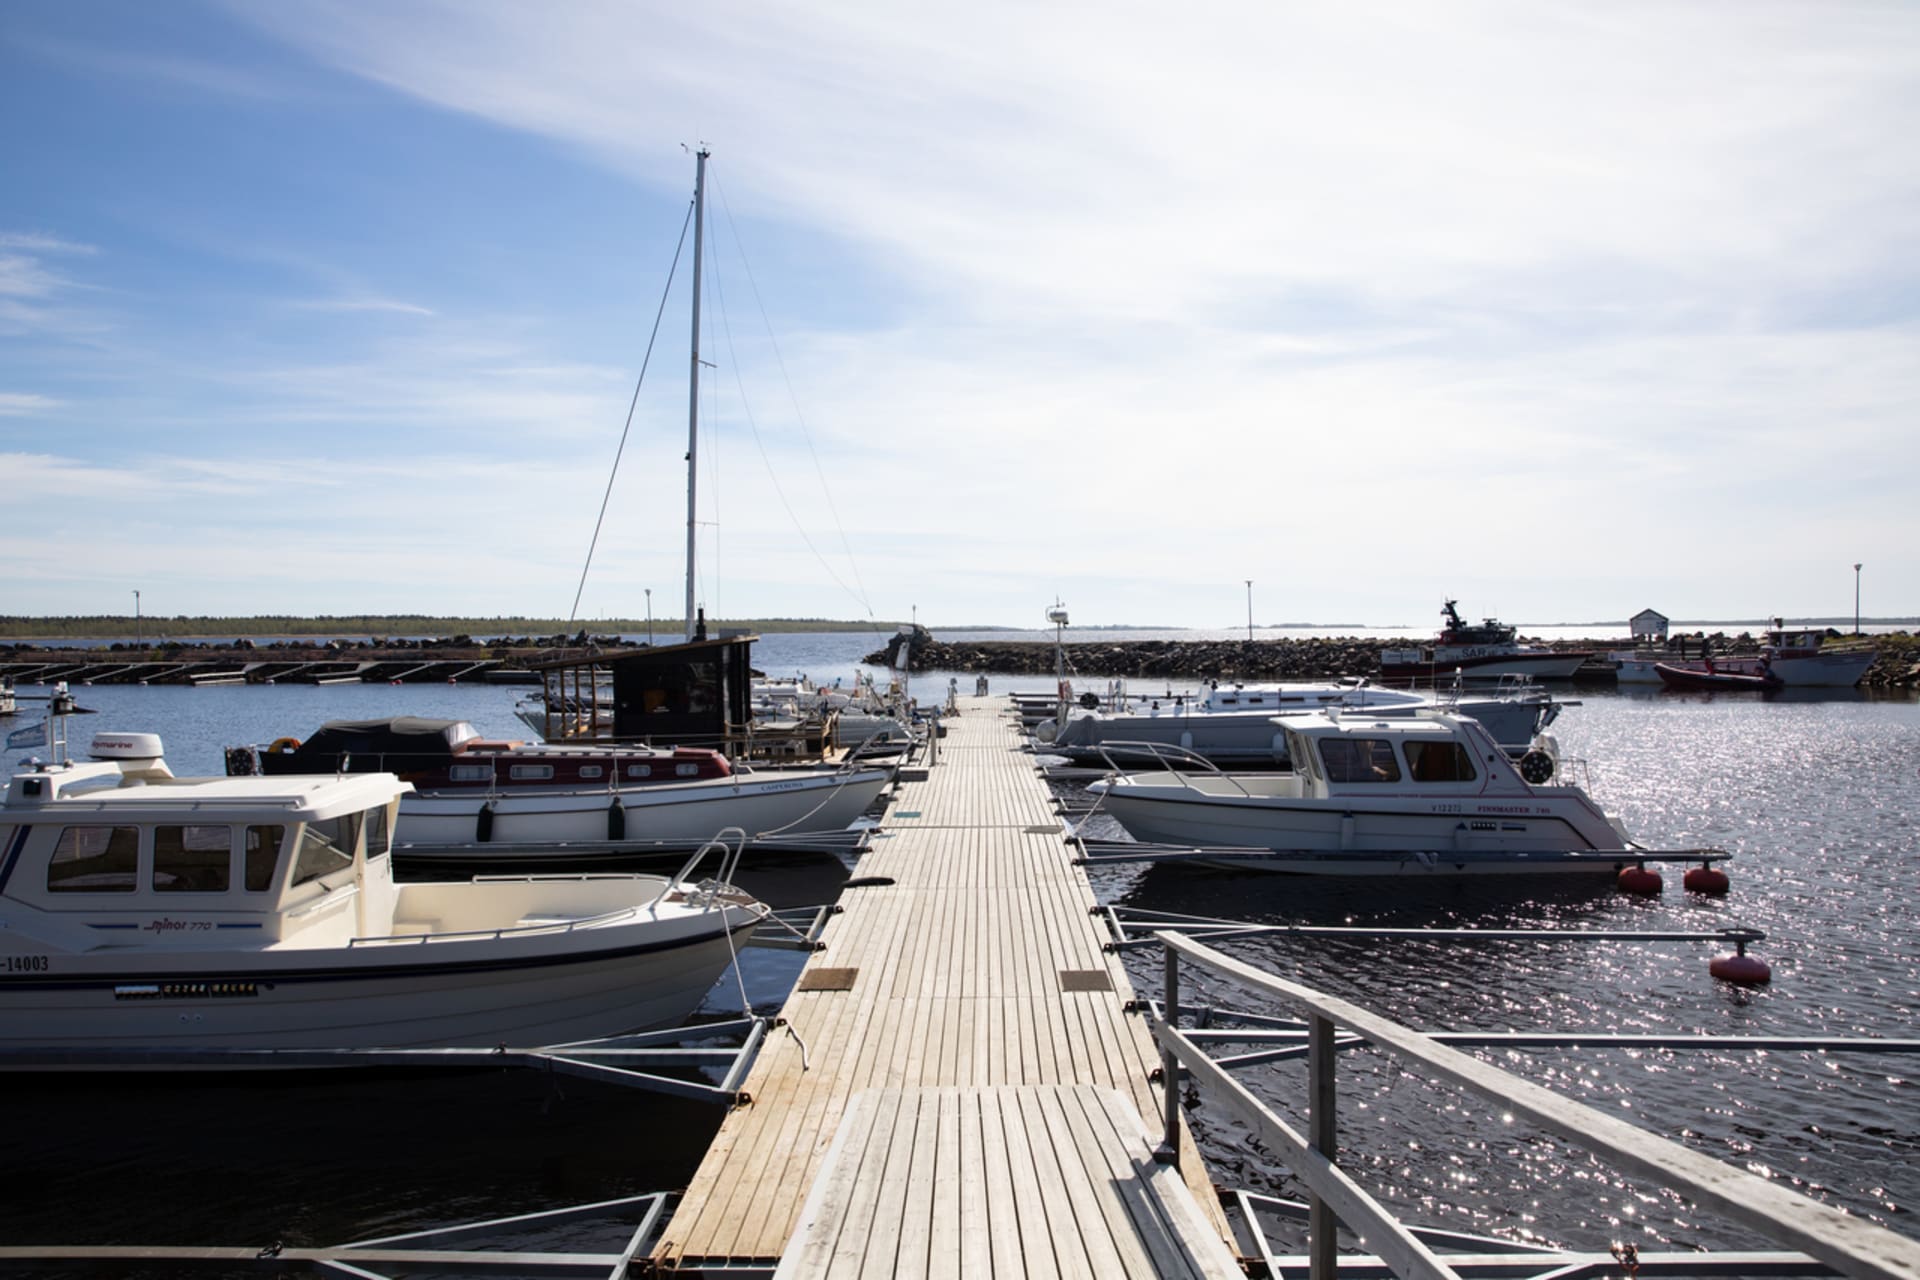 A dock and boats at Kiviniemi port.